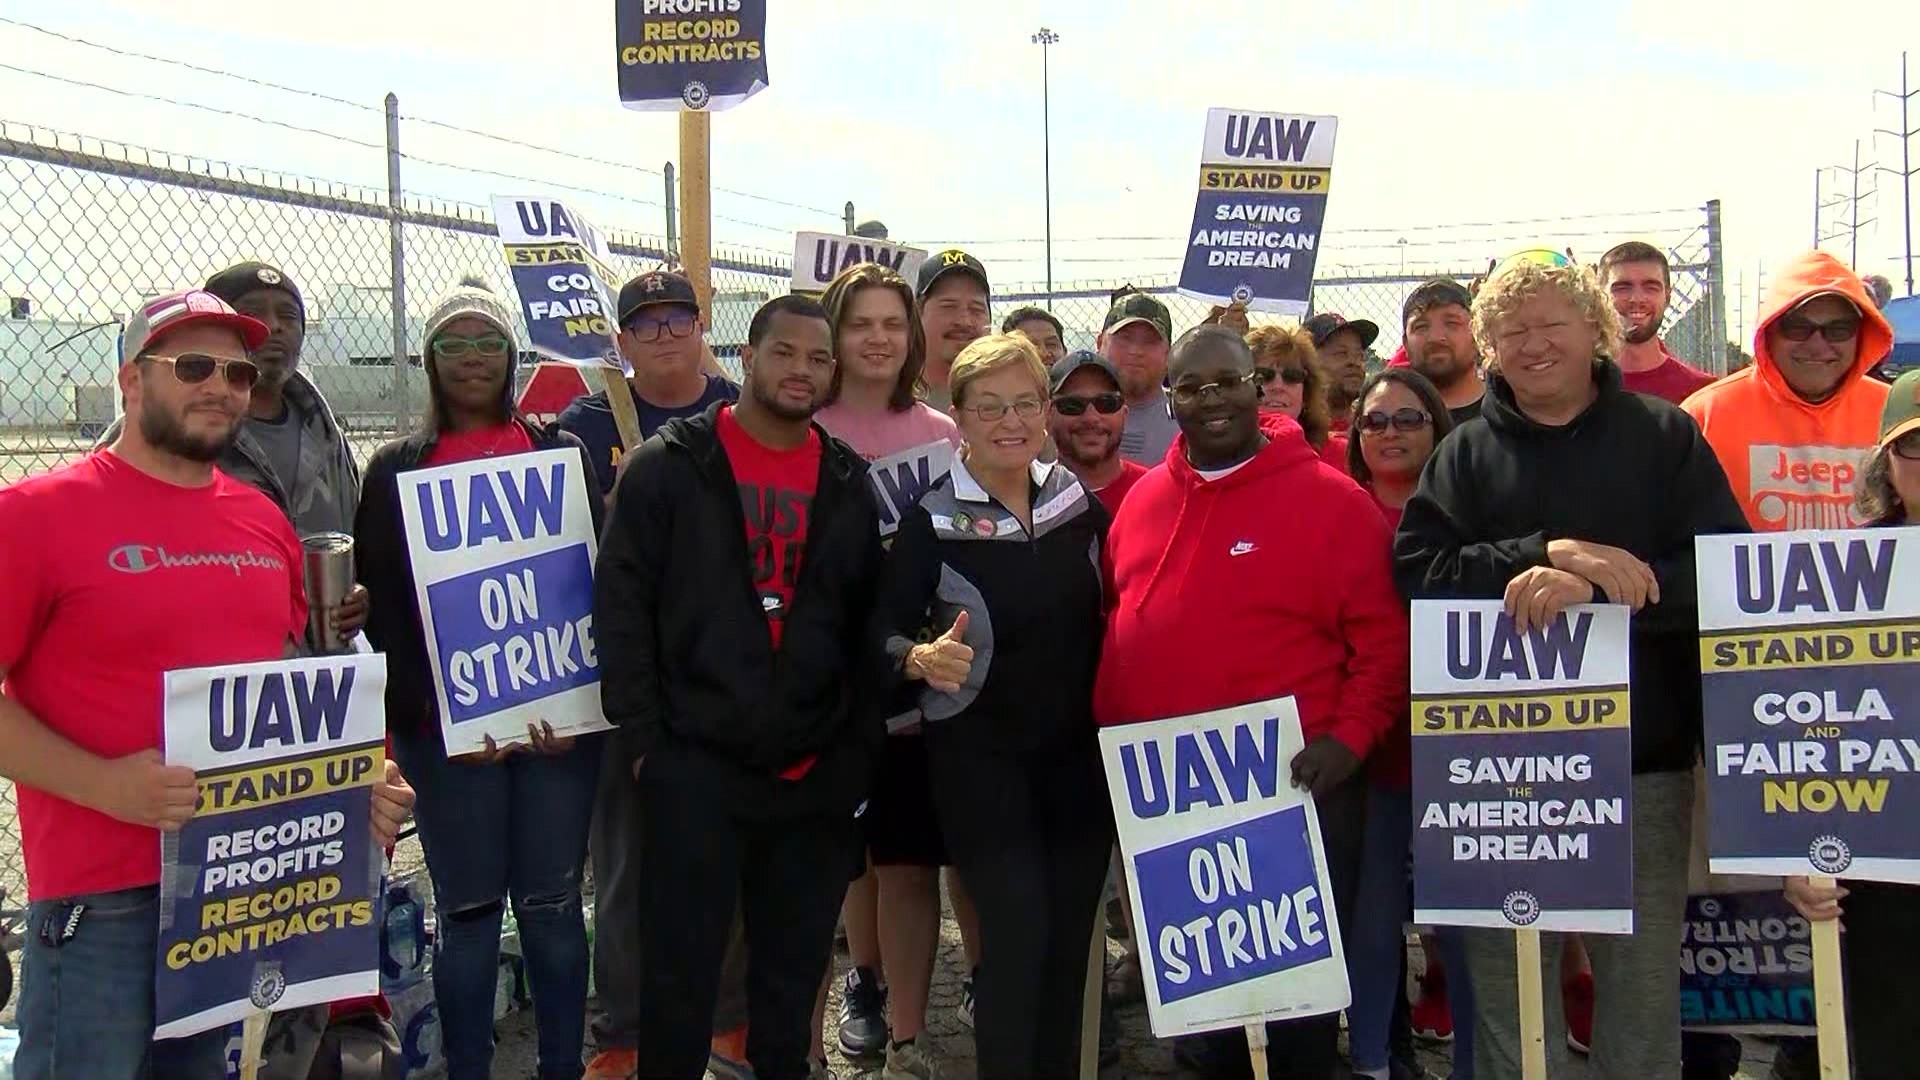 U.S. Rep. Marcy Kaptur, D-Toledo, visited the picket lines at the Toledo Jeep Assembly Plant on the second day of the UAW strike Saturday morning.